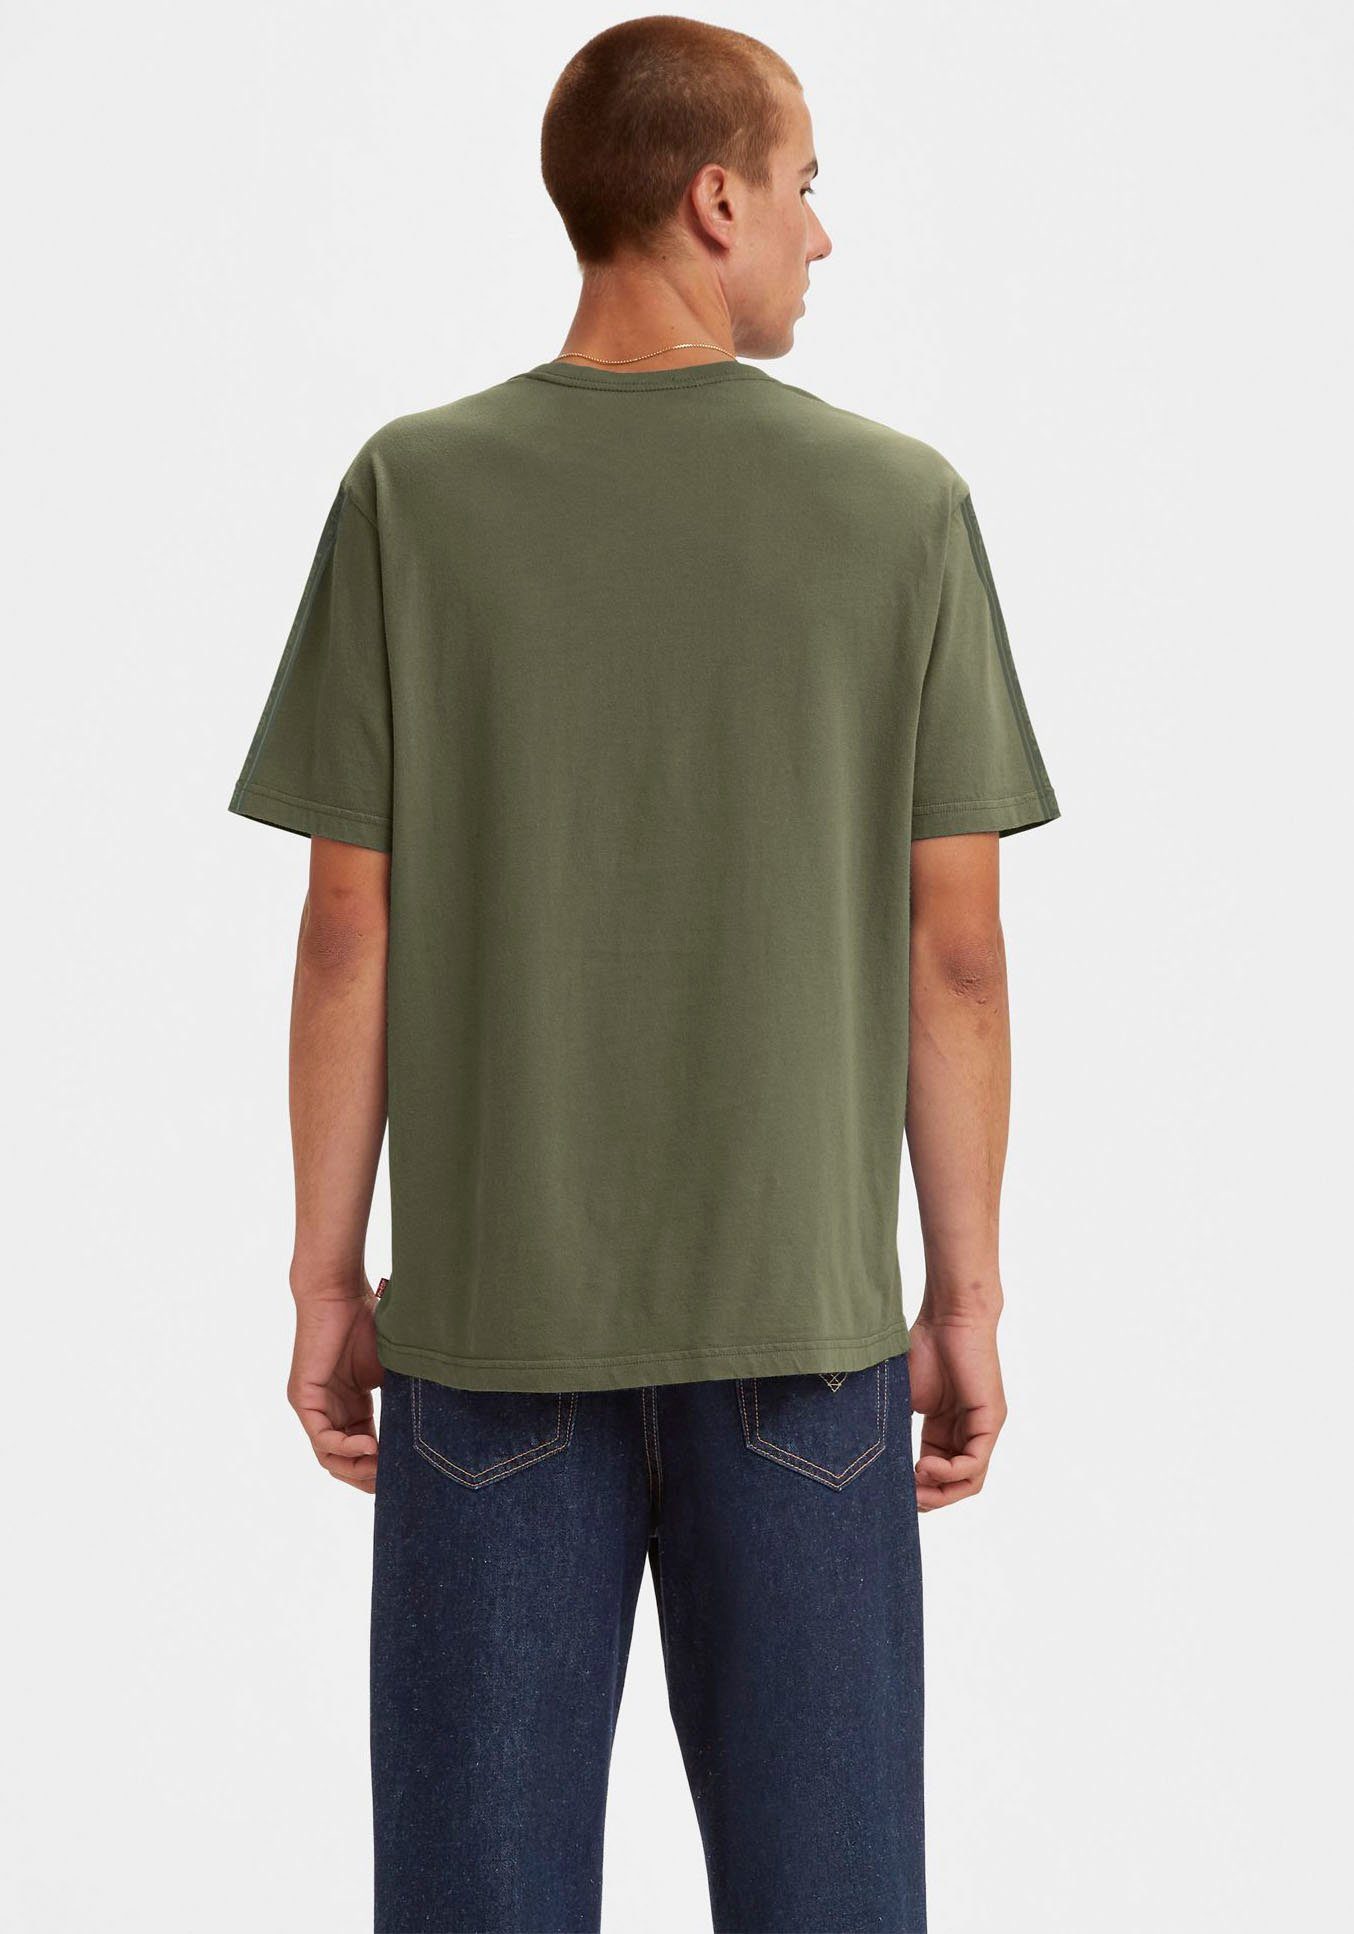 Levi's® T-Shirt RELAXED FIT green TEE loden tape